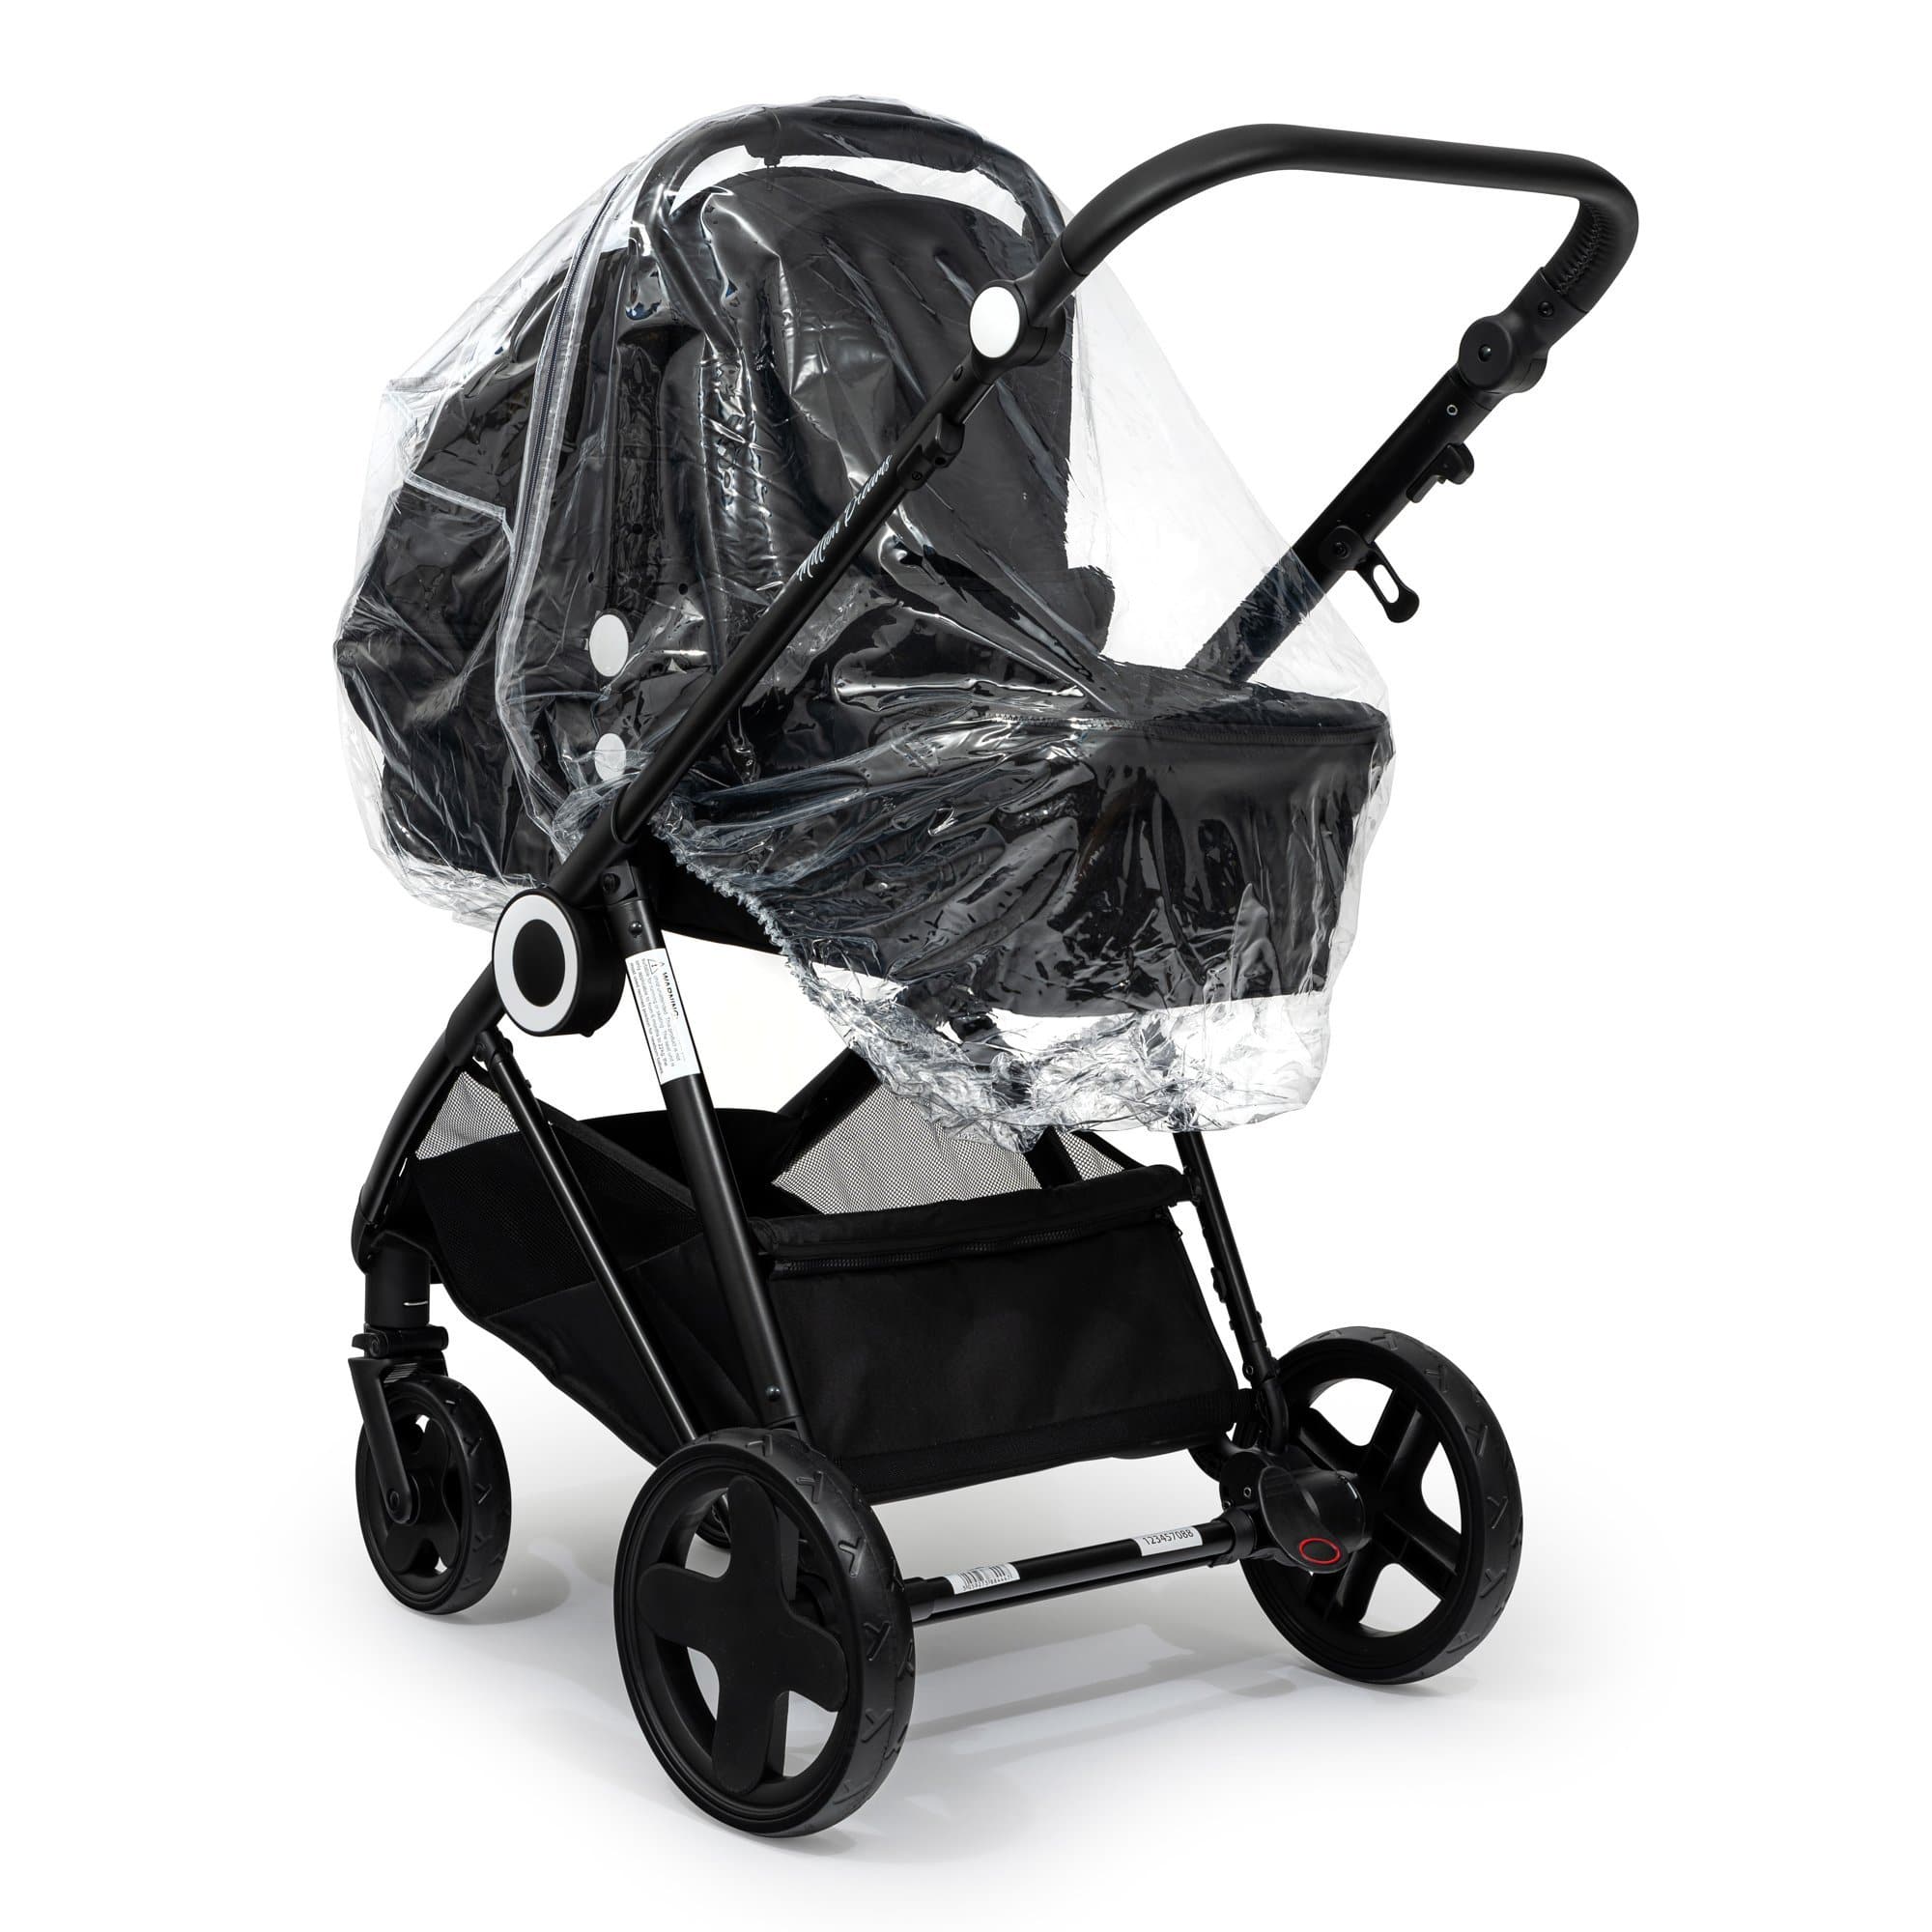 2 in 1 Rain Cover Compatible with Inglesina - Fits All Models - For Your Little One